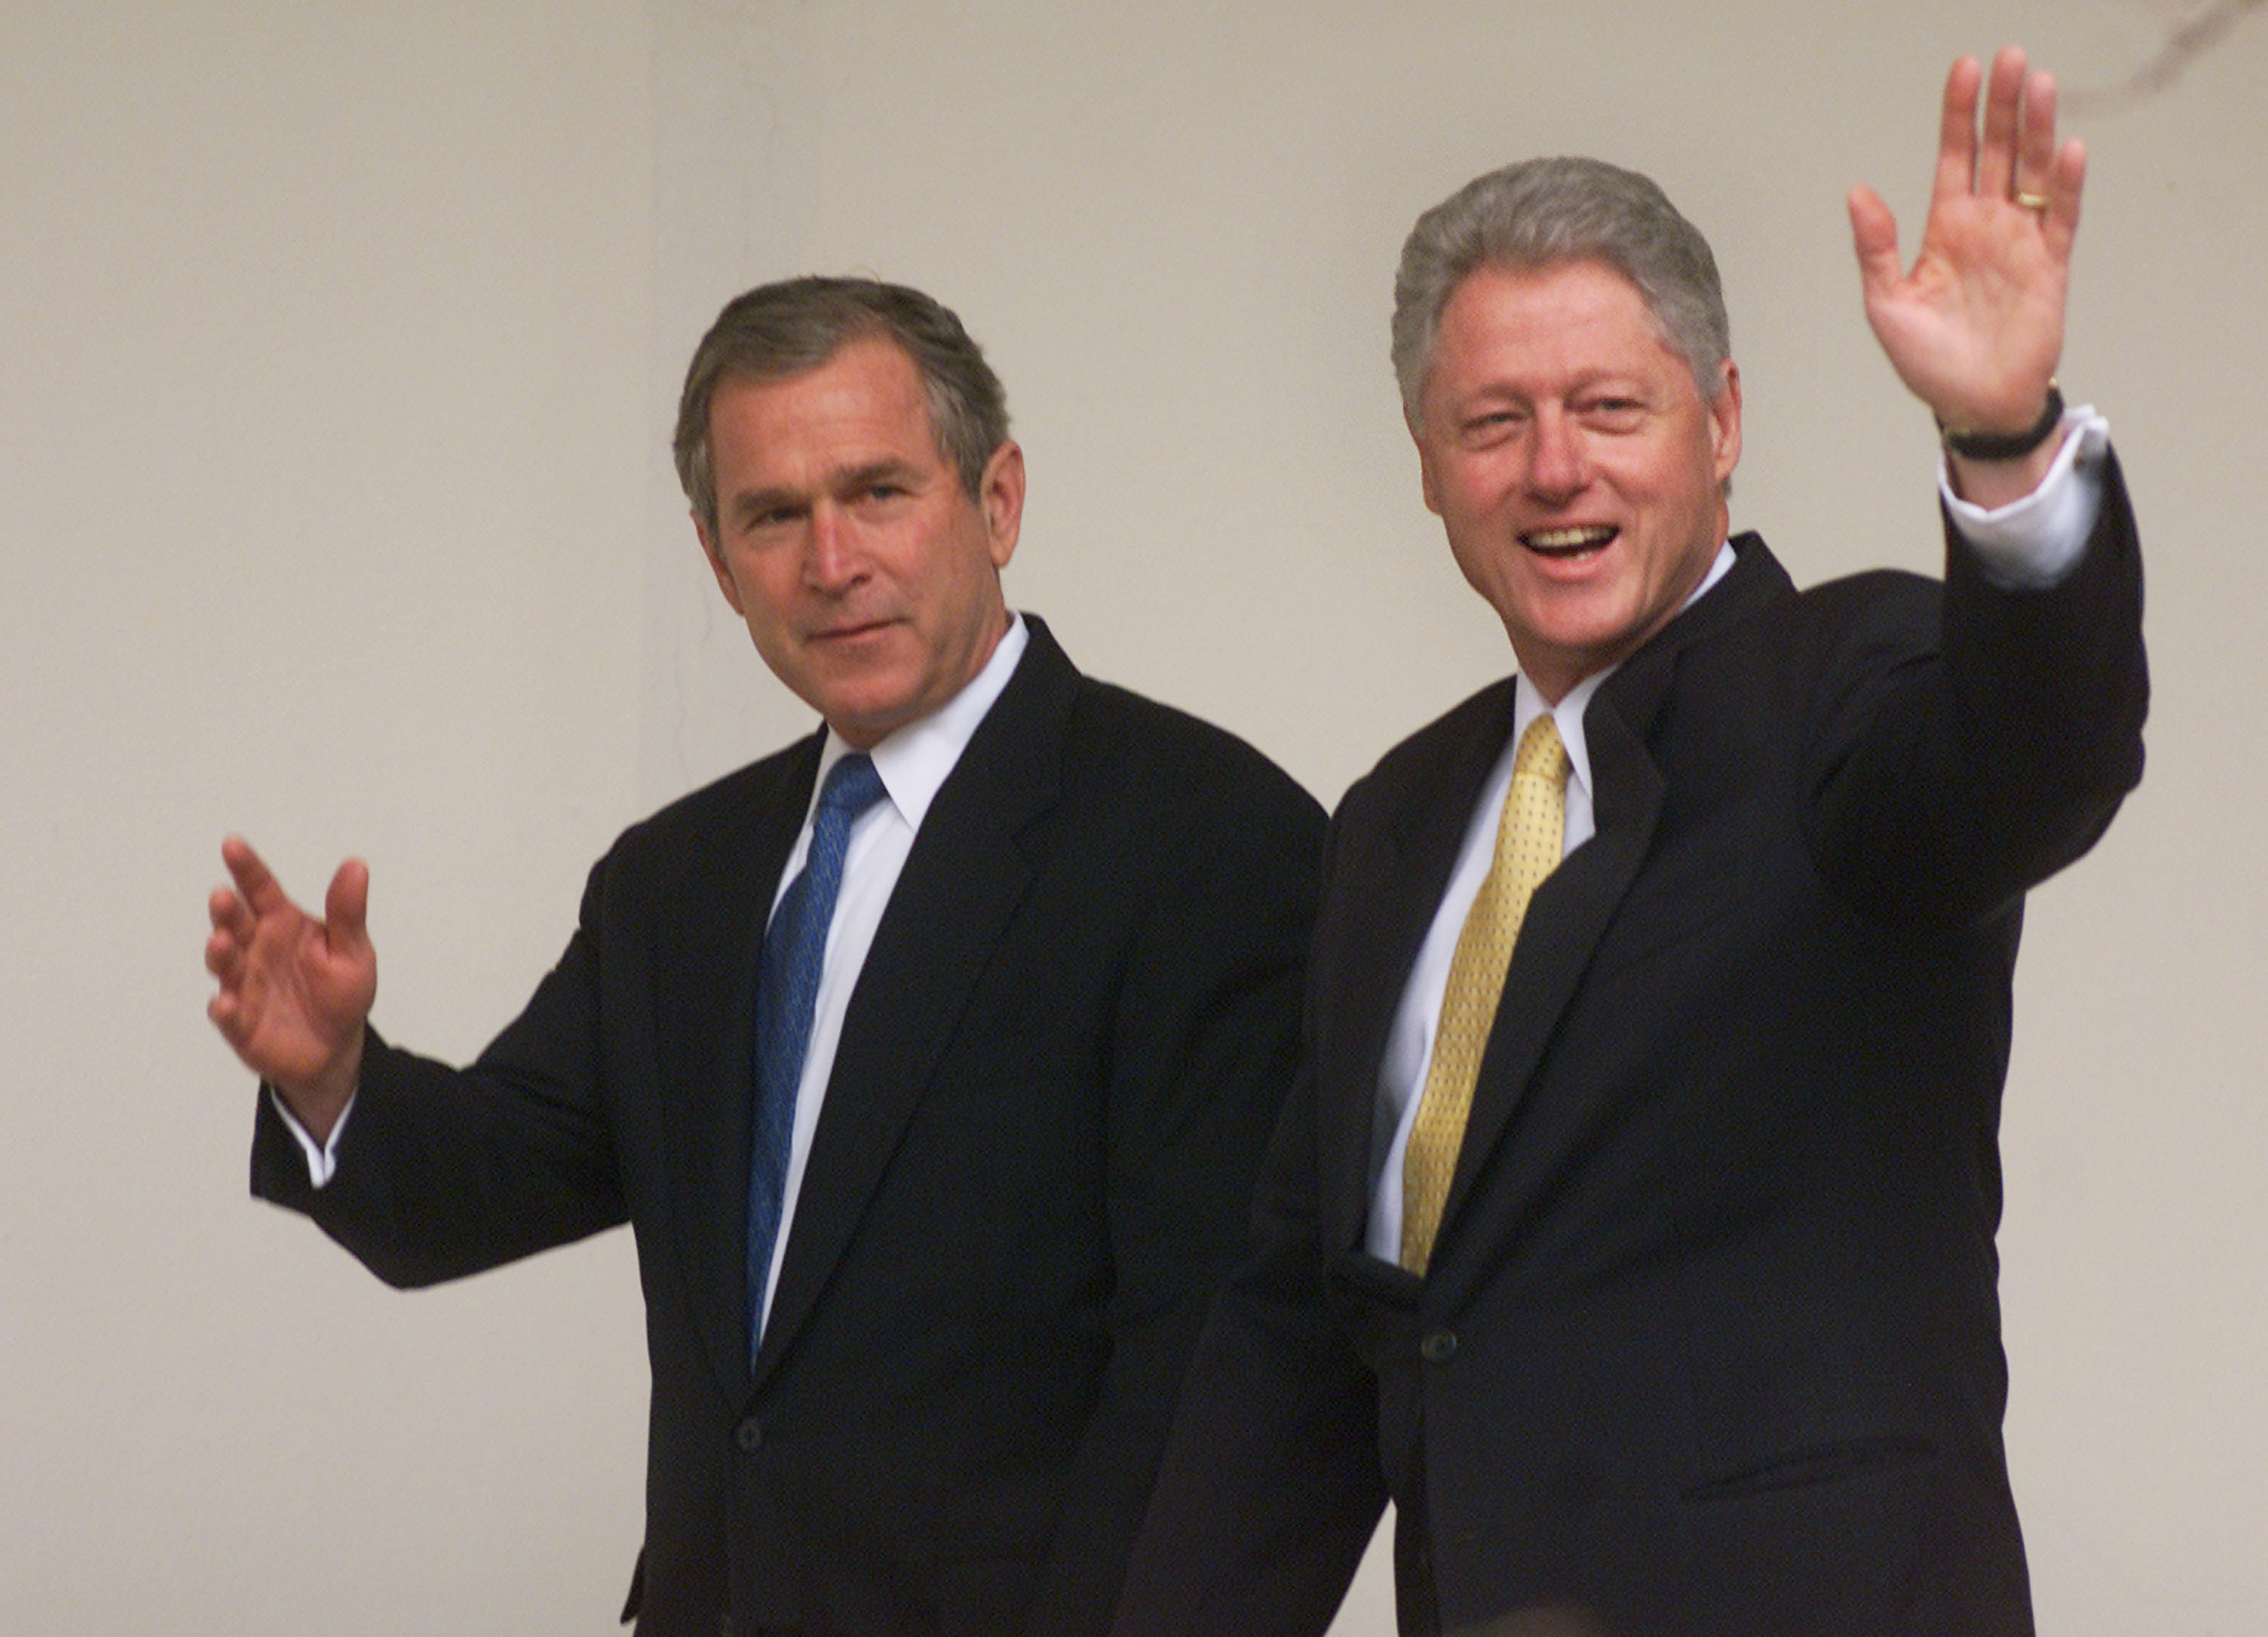 George W. Bush, left, and Bill Clinton wave before their meeting at the White House in Washington, D.C., on Dec. 19, 2000 (Mark Wilson—Getty Images)